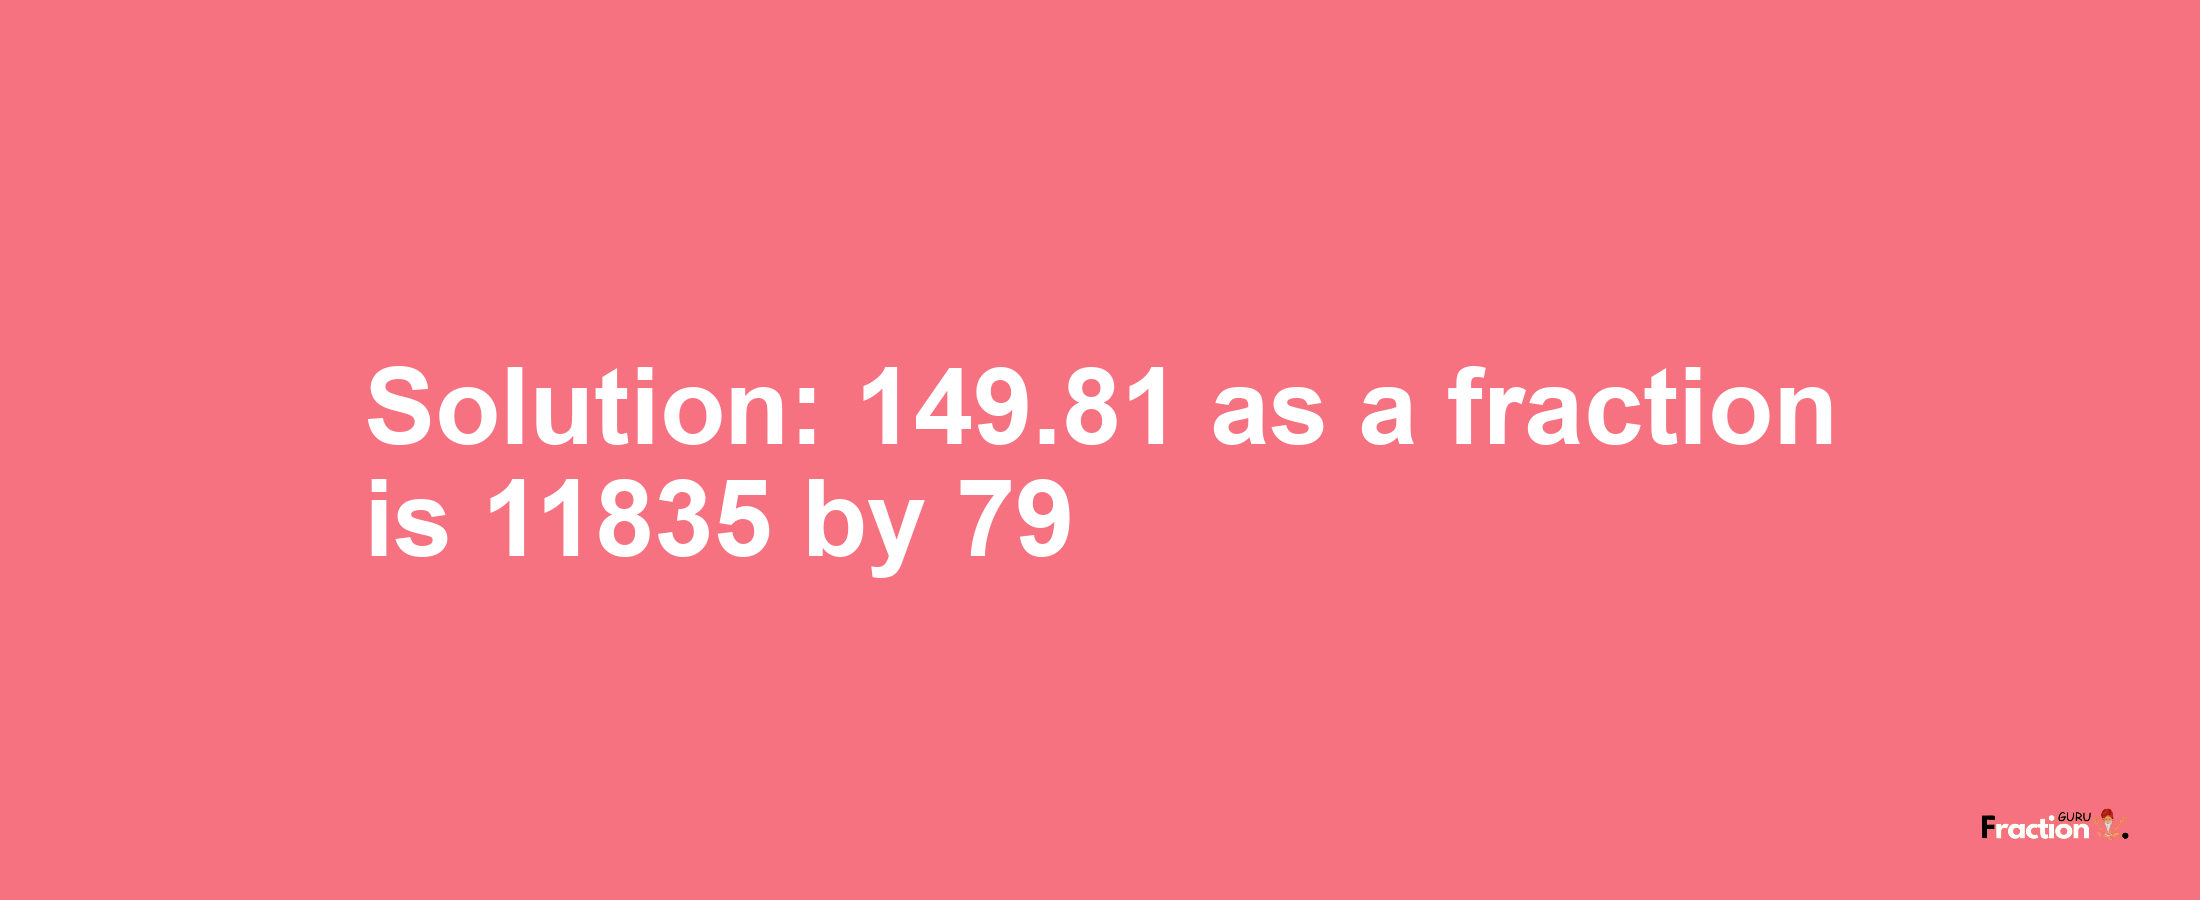 Solution:149.81 as a fraction is 11835/79